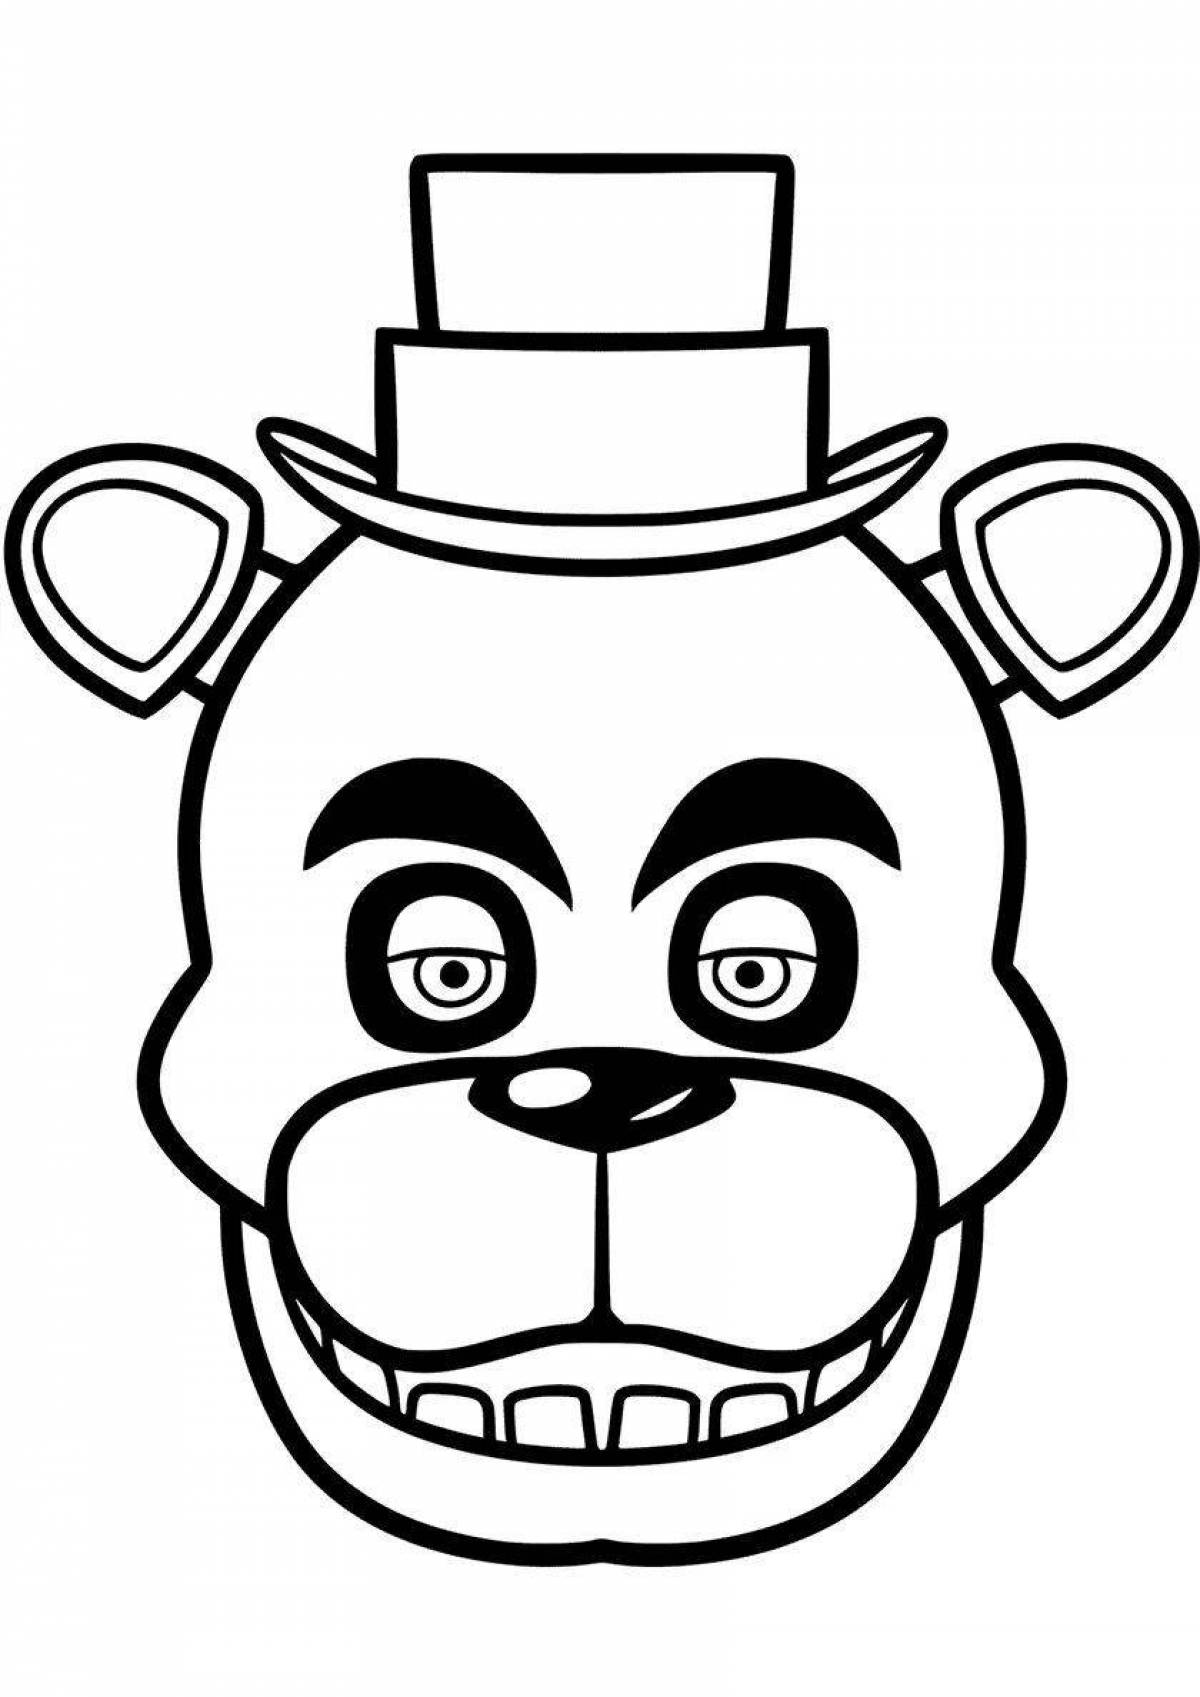 Feddy magnetic bear coloring book